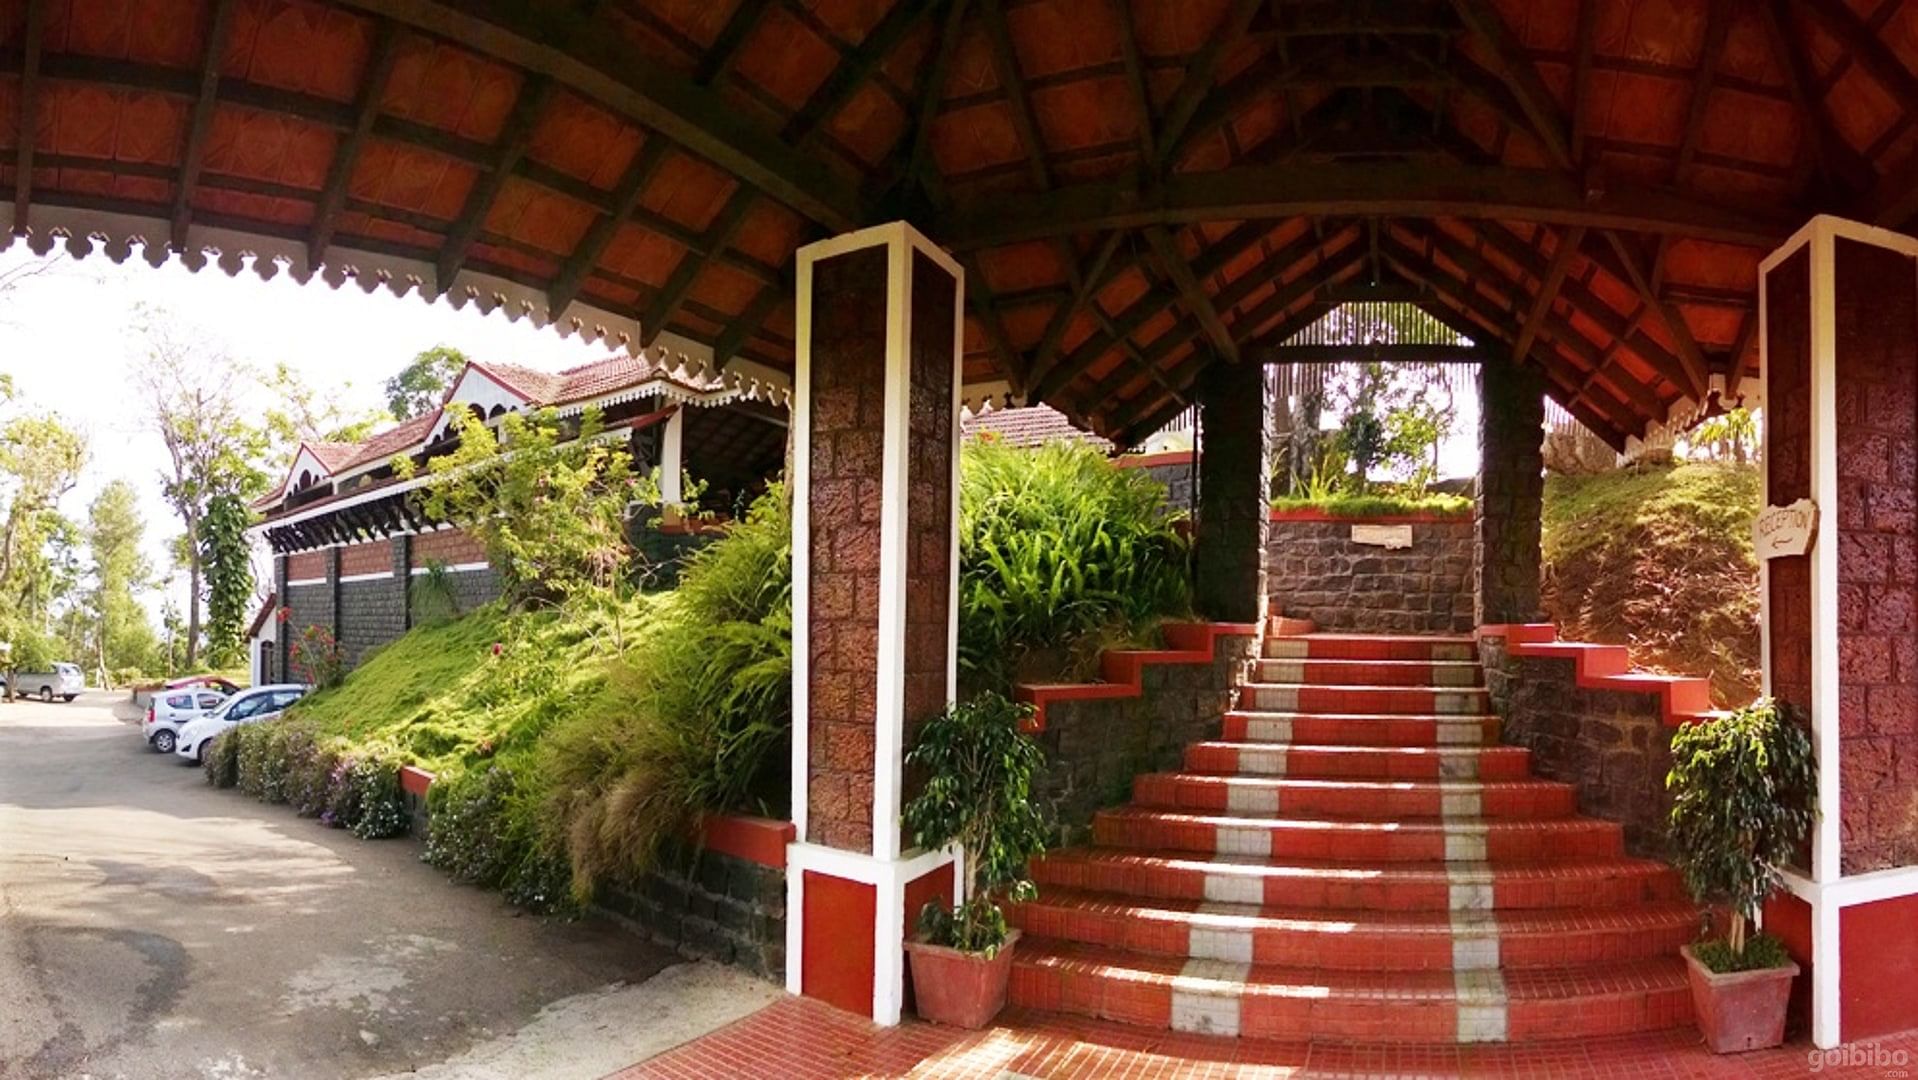 Porcupine Castle in Hanchikad, Coorg